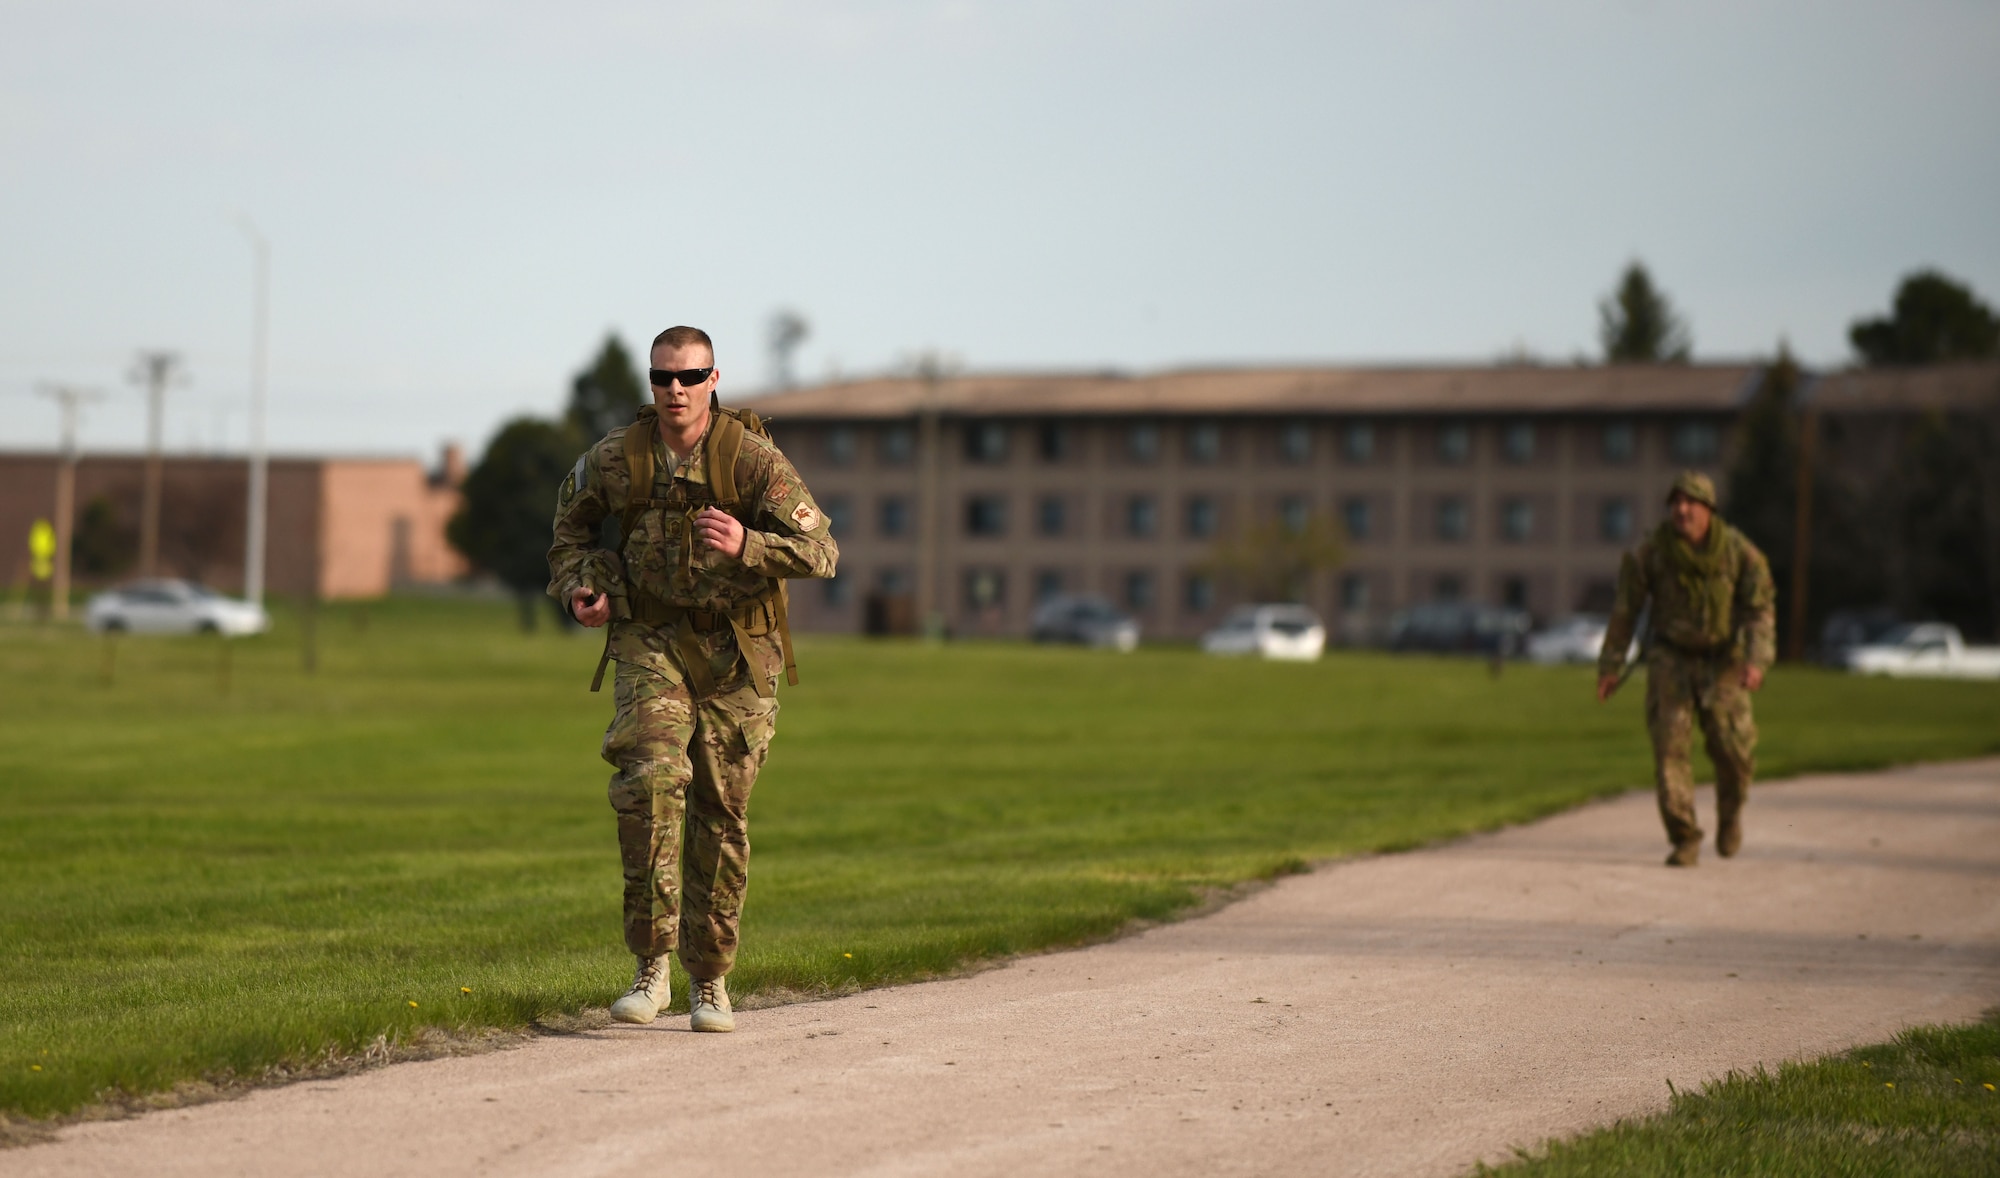 Chief Master Sgt. Jesse Franks, a 28th Security Forces superintendent, competes in the 4.5-mile Police Week Ruck Challenge at Heritage Lake on Ellsworth Air Force Base, S.D., May 13, 2019. National Police Week is recognized across the nation to pay tribute to law enforcement officers who have died in line of duty, as well as officers who continue to serve in their communities. (U.S. Air Force photo by Airman 1st Class Christina Bennett)